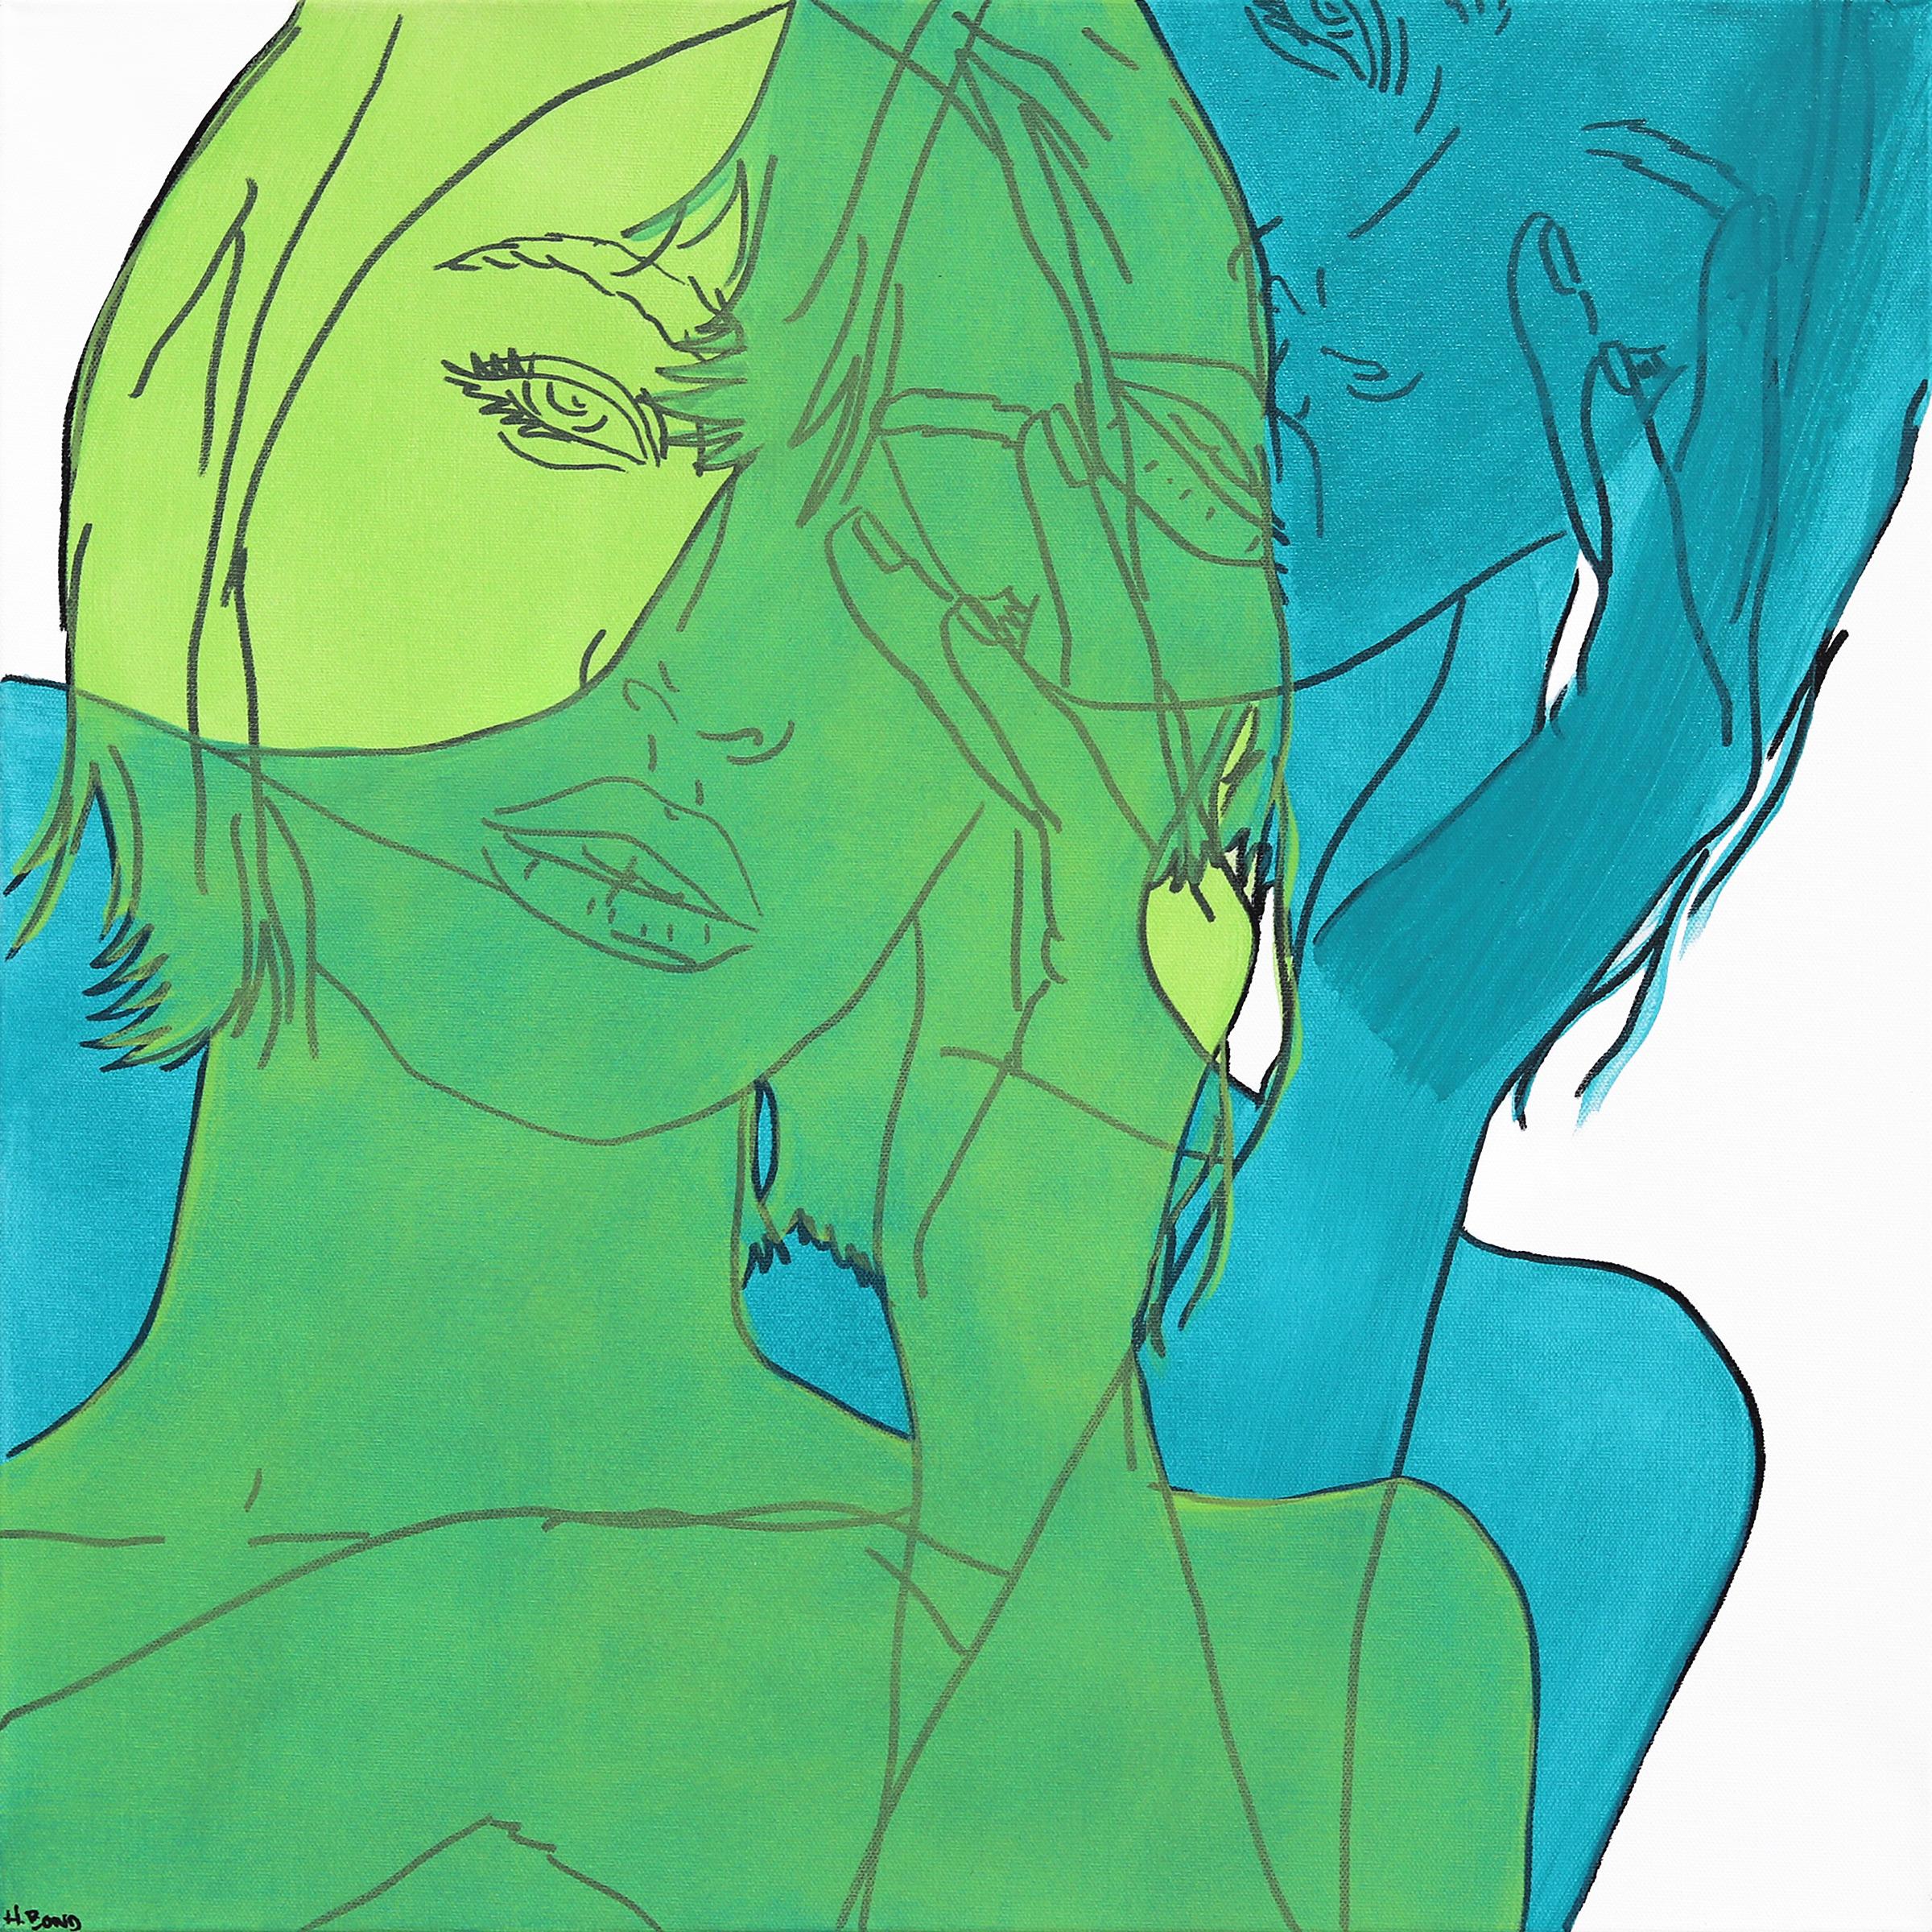 Untitled (Spring I) - Figurative Portrait Green and Blue Woman Pop Art Painting - Mixed Media Art by Hilary Bond